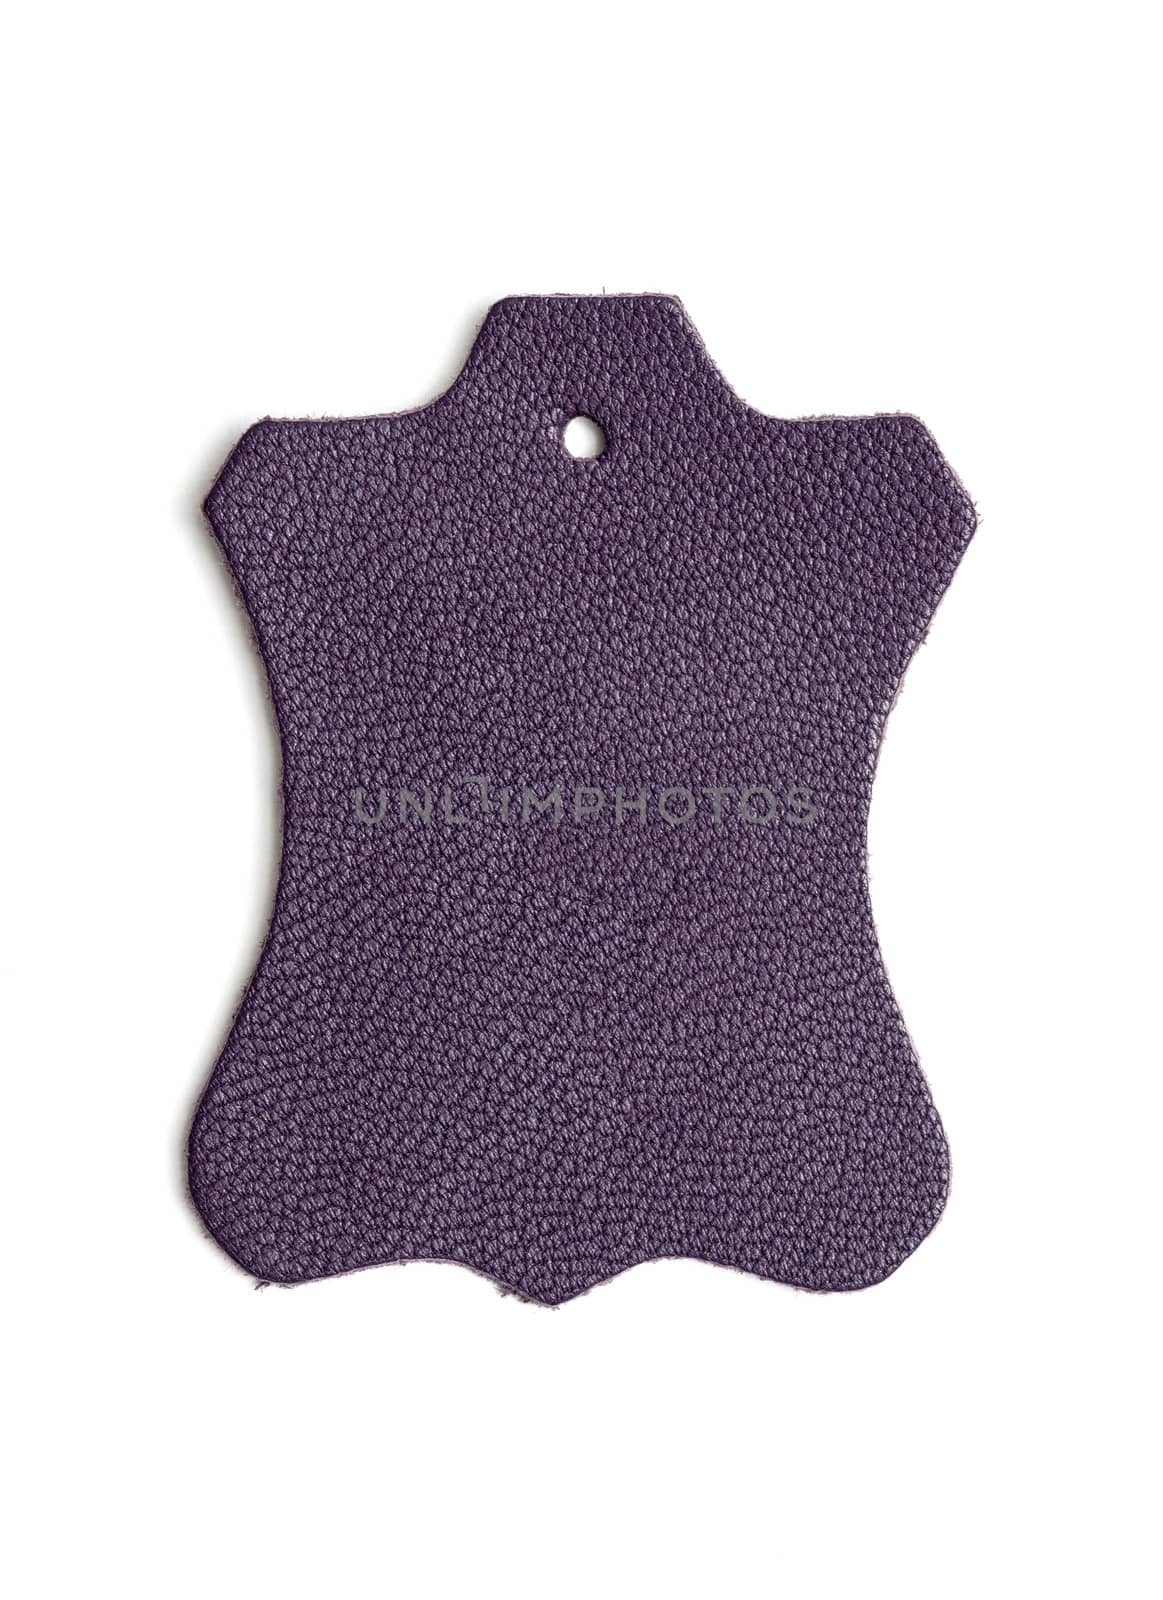 leather tags on white background by DNKSTUDIO